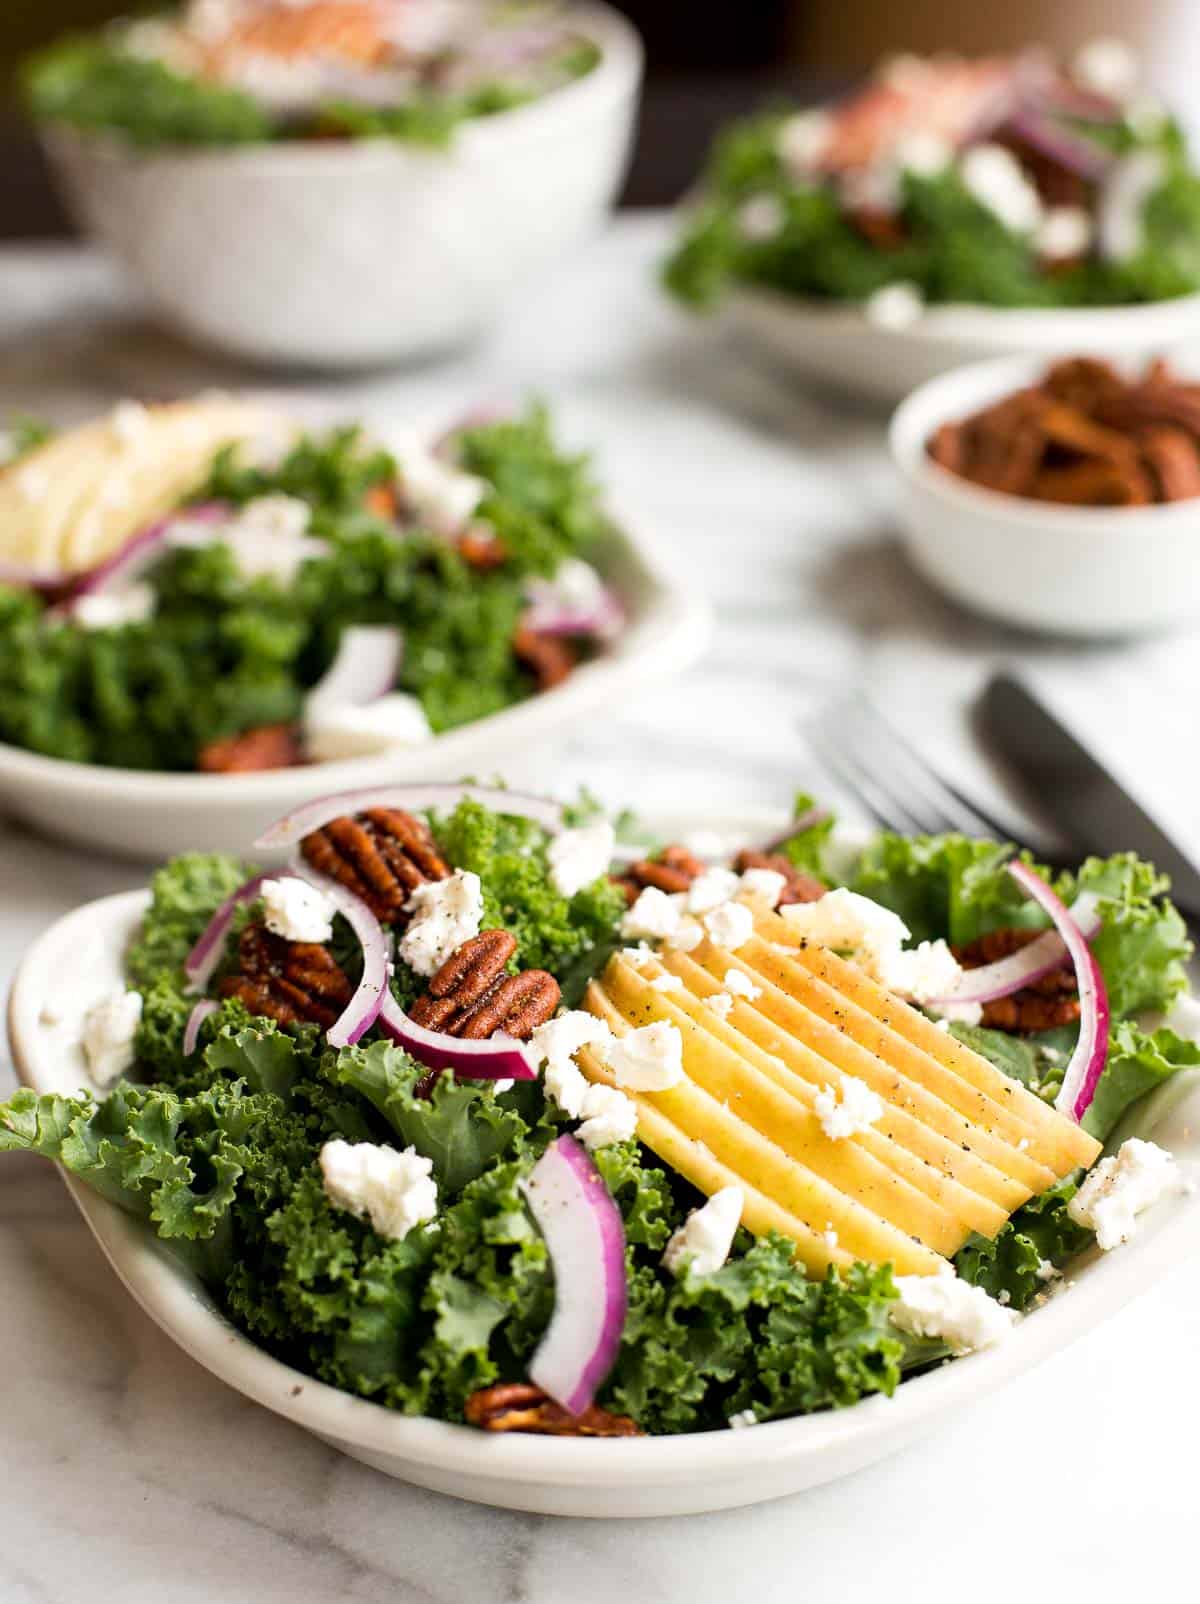 Cozy winter kale salad with apple cider vinaigrette is easy to make with crispy apples, tangy goat cheese and crunchy spiced pecans in under 10 minutes. | aheadofthyme.com